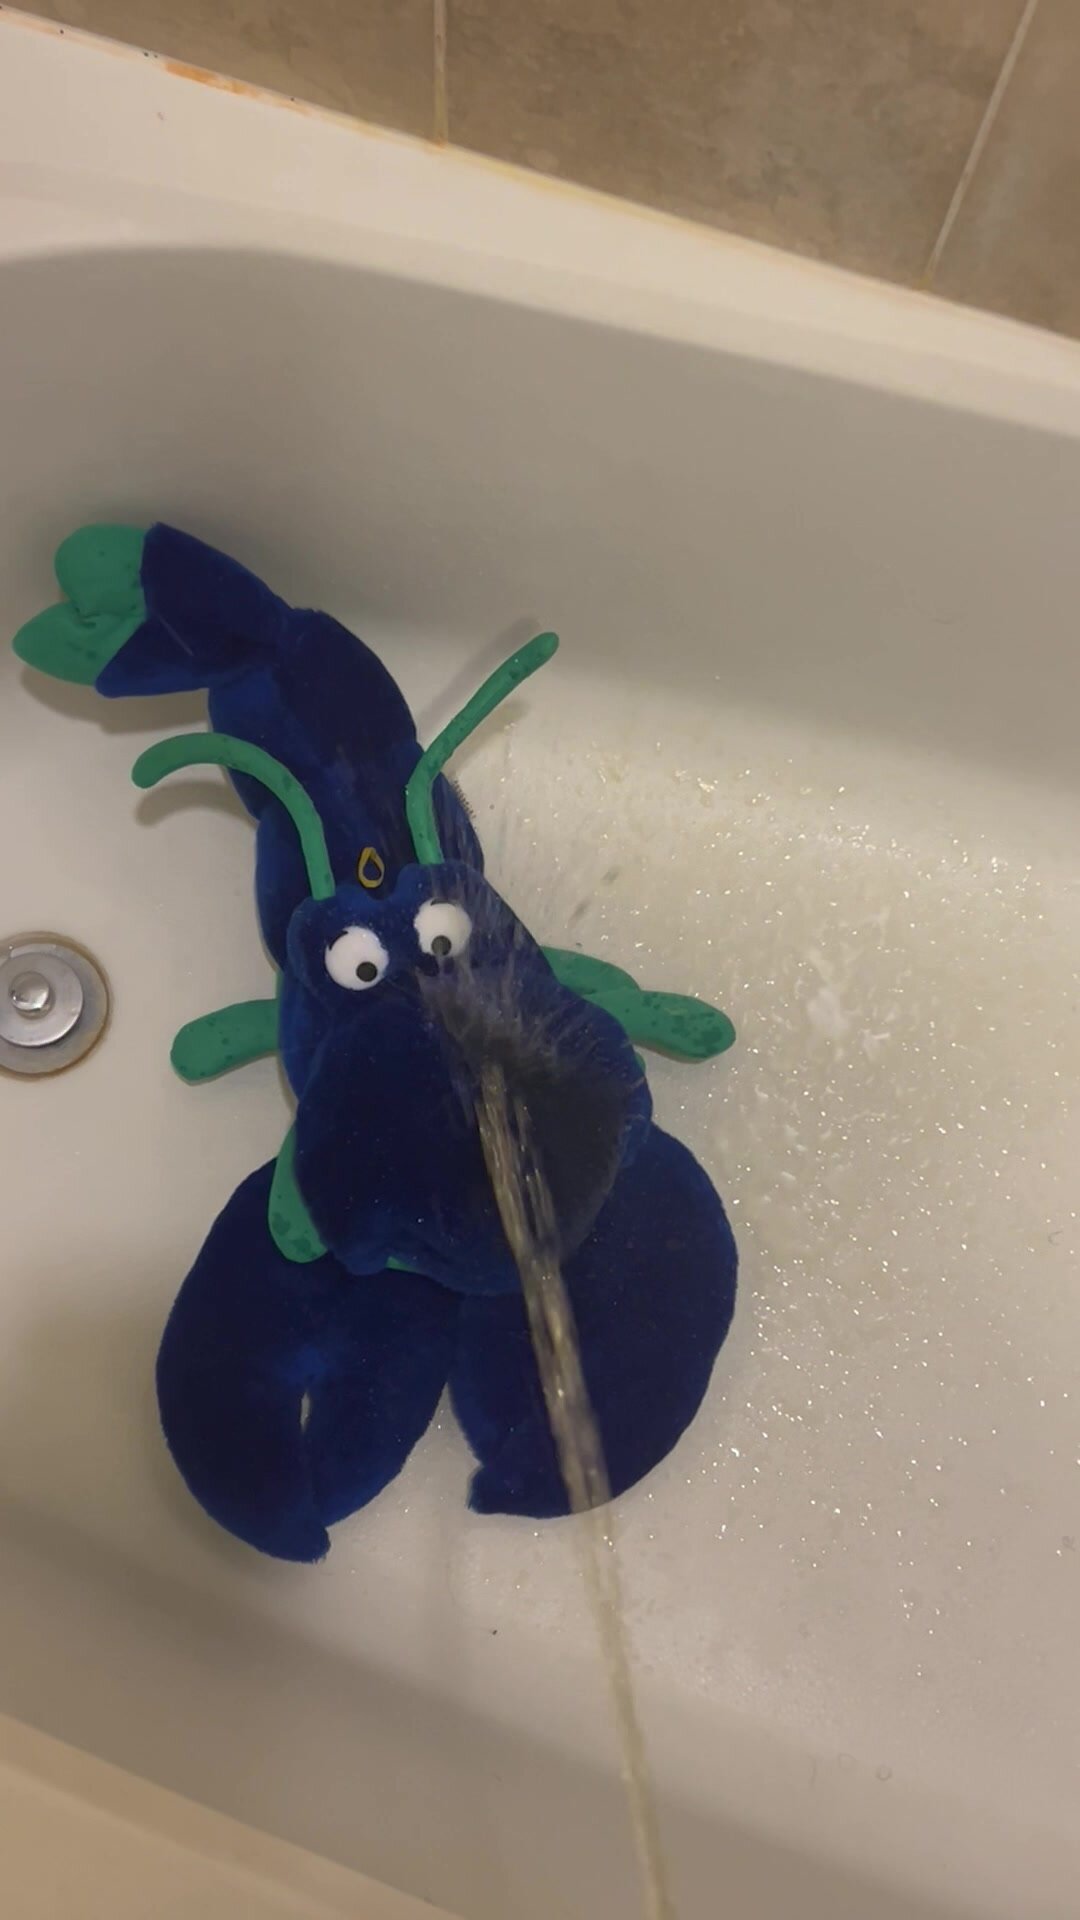 Pissing On A Lobster Plush!